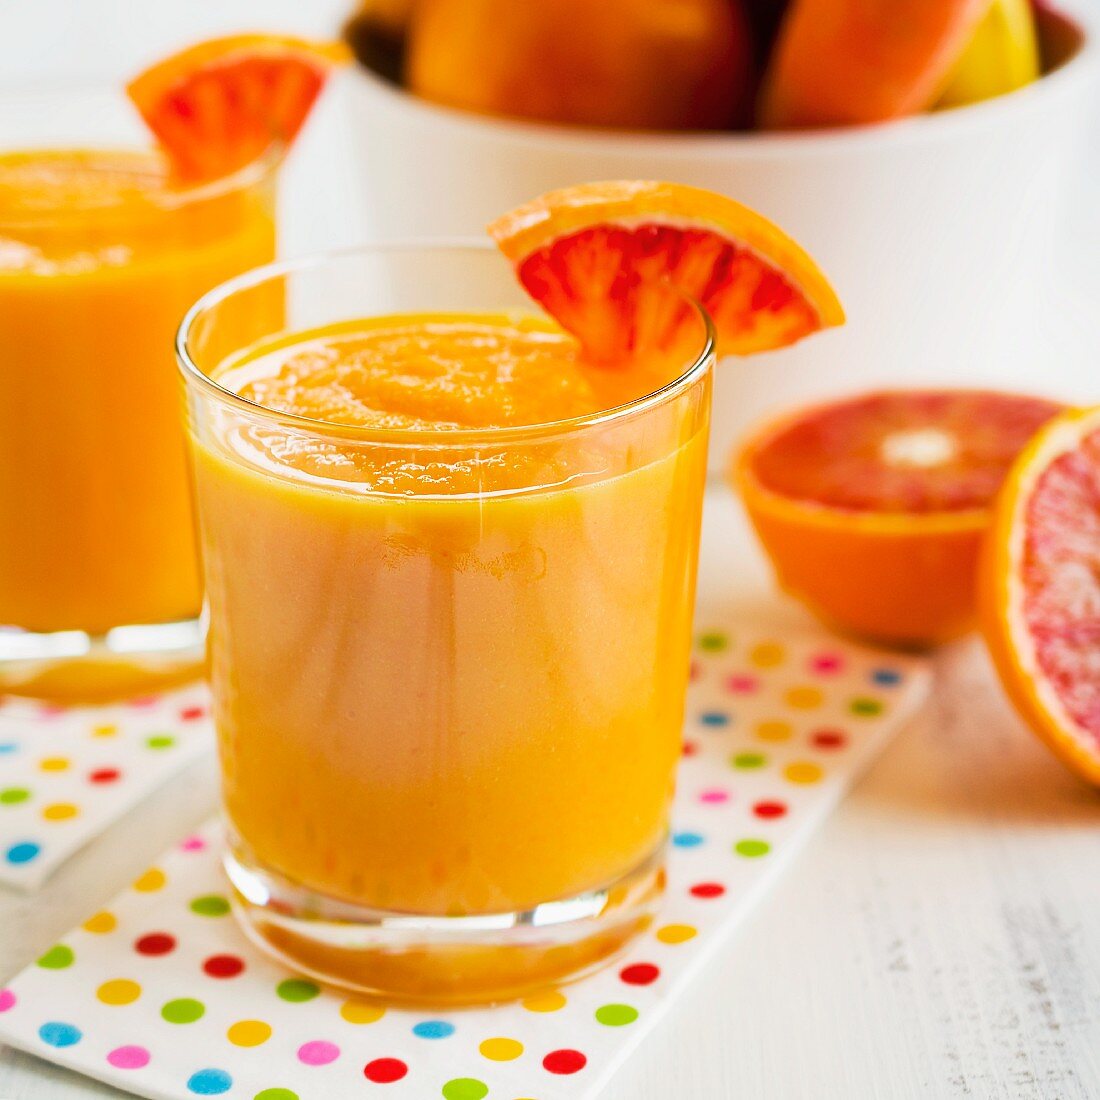 Smoothies made with orange fruits and vegetables